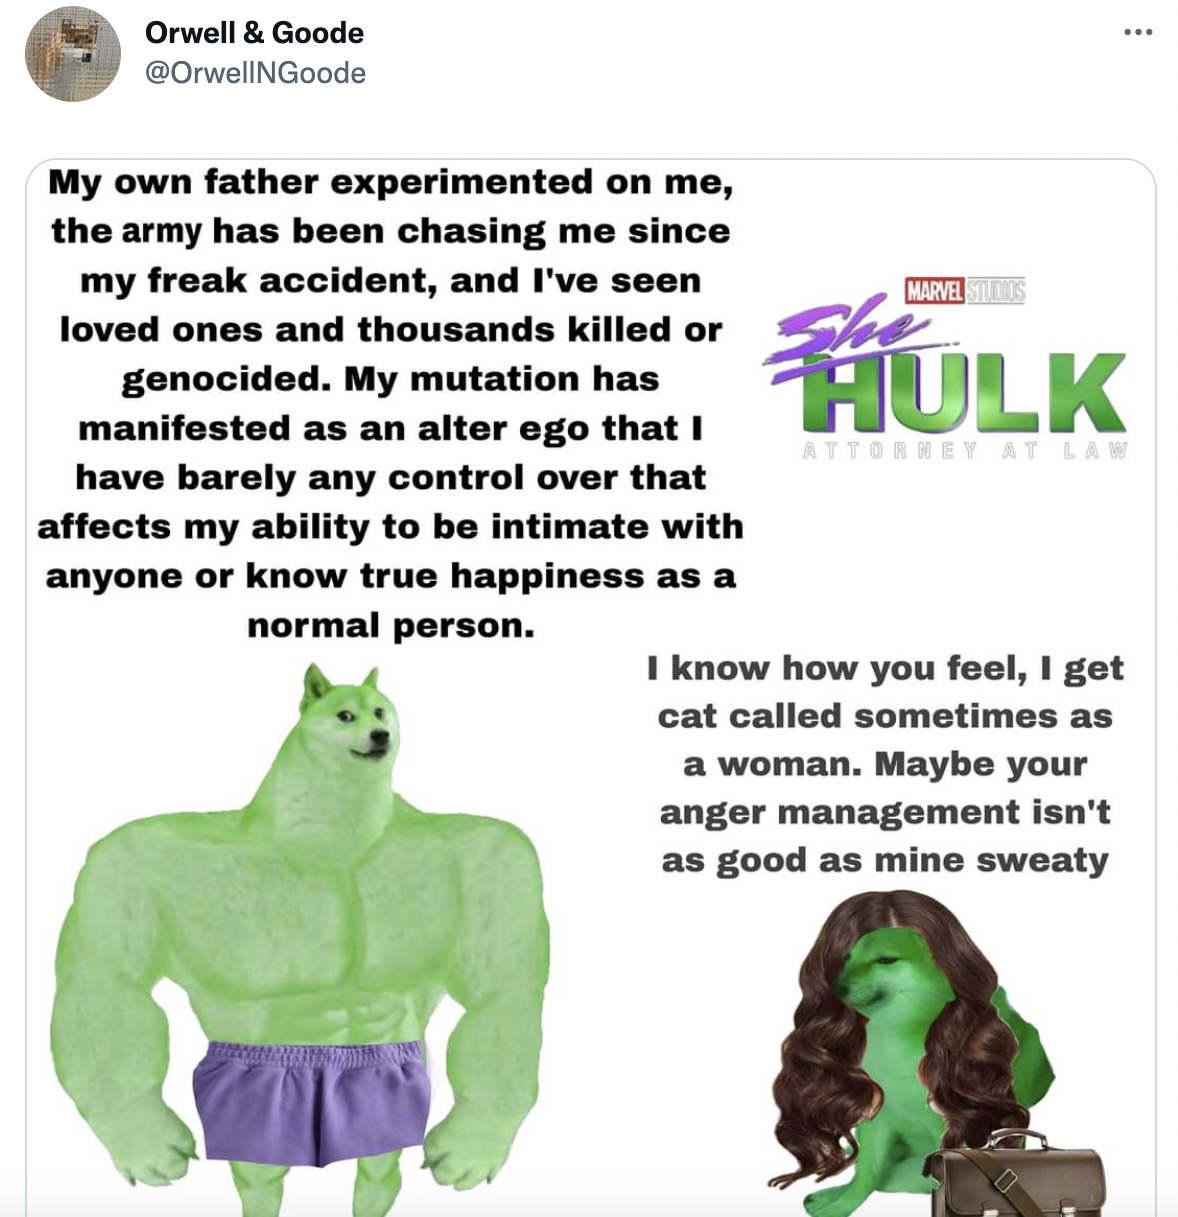 She-Hulk memes - top - Orwell & Goode My own father experimented on me, the army has been chasing me since my freak accident, and I've seen loved ones and thousands killed or genocided. My mutation has manifested as an alter ego that I have barely any con